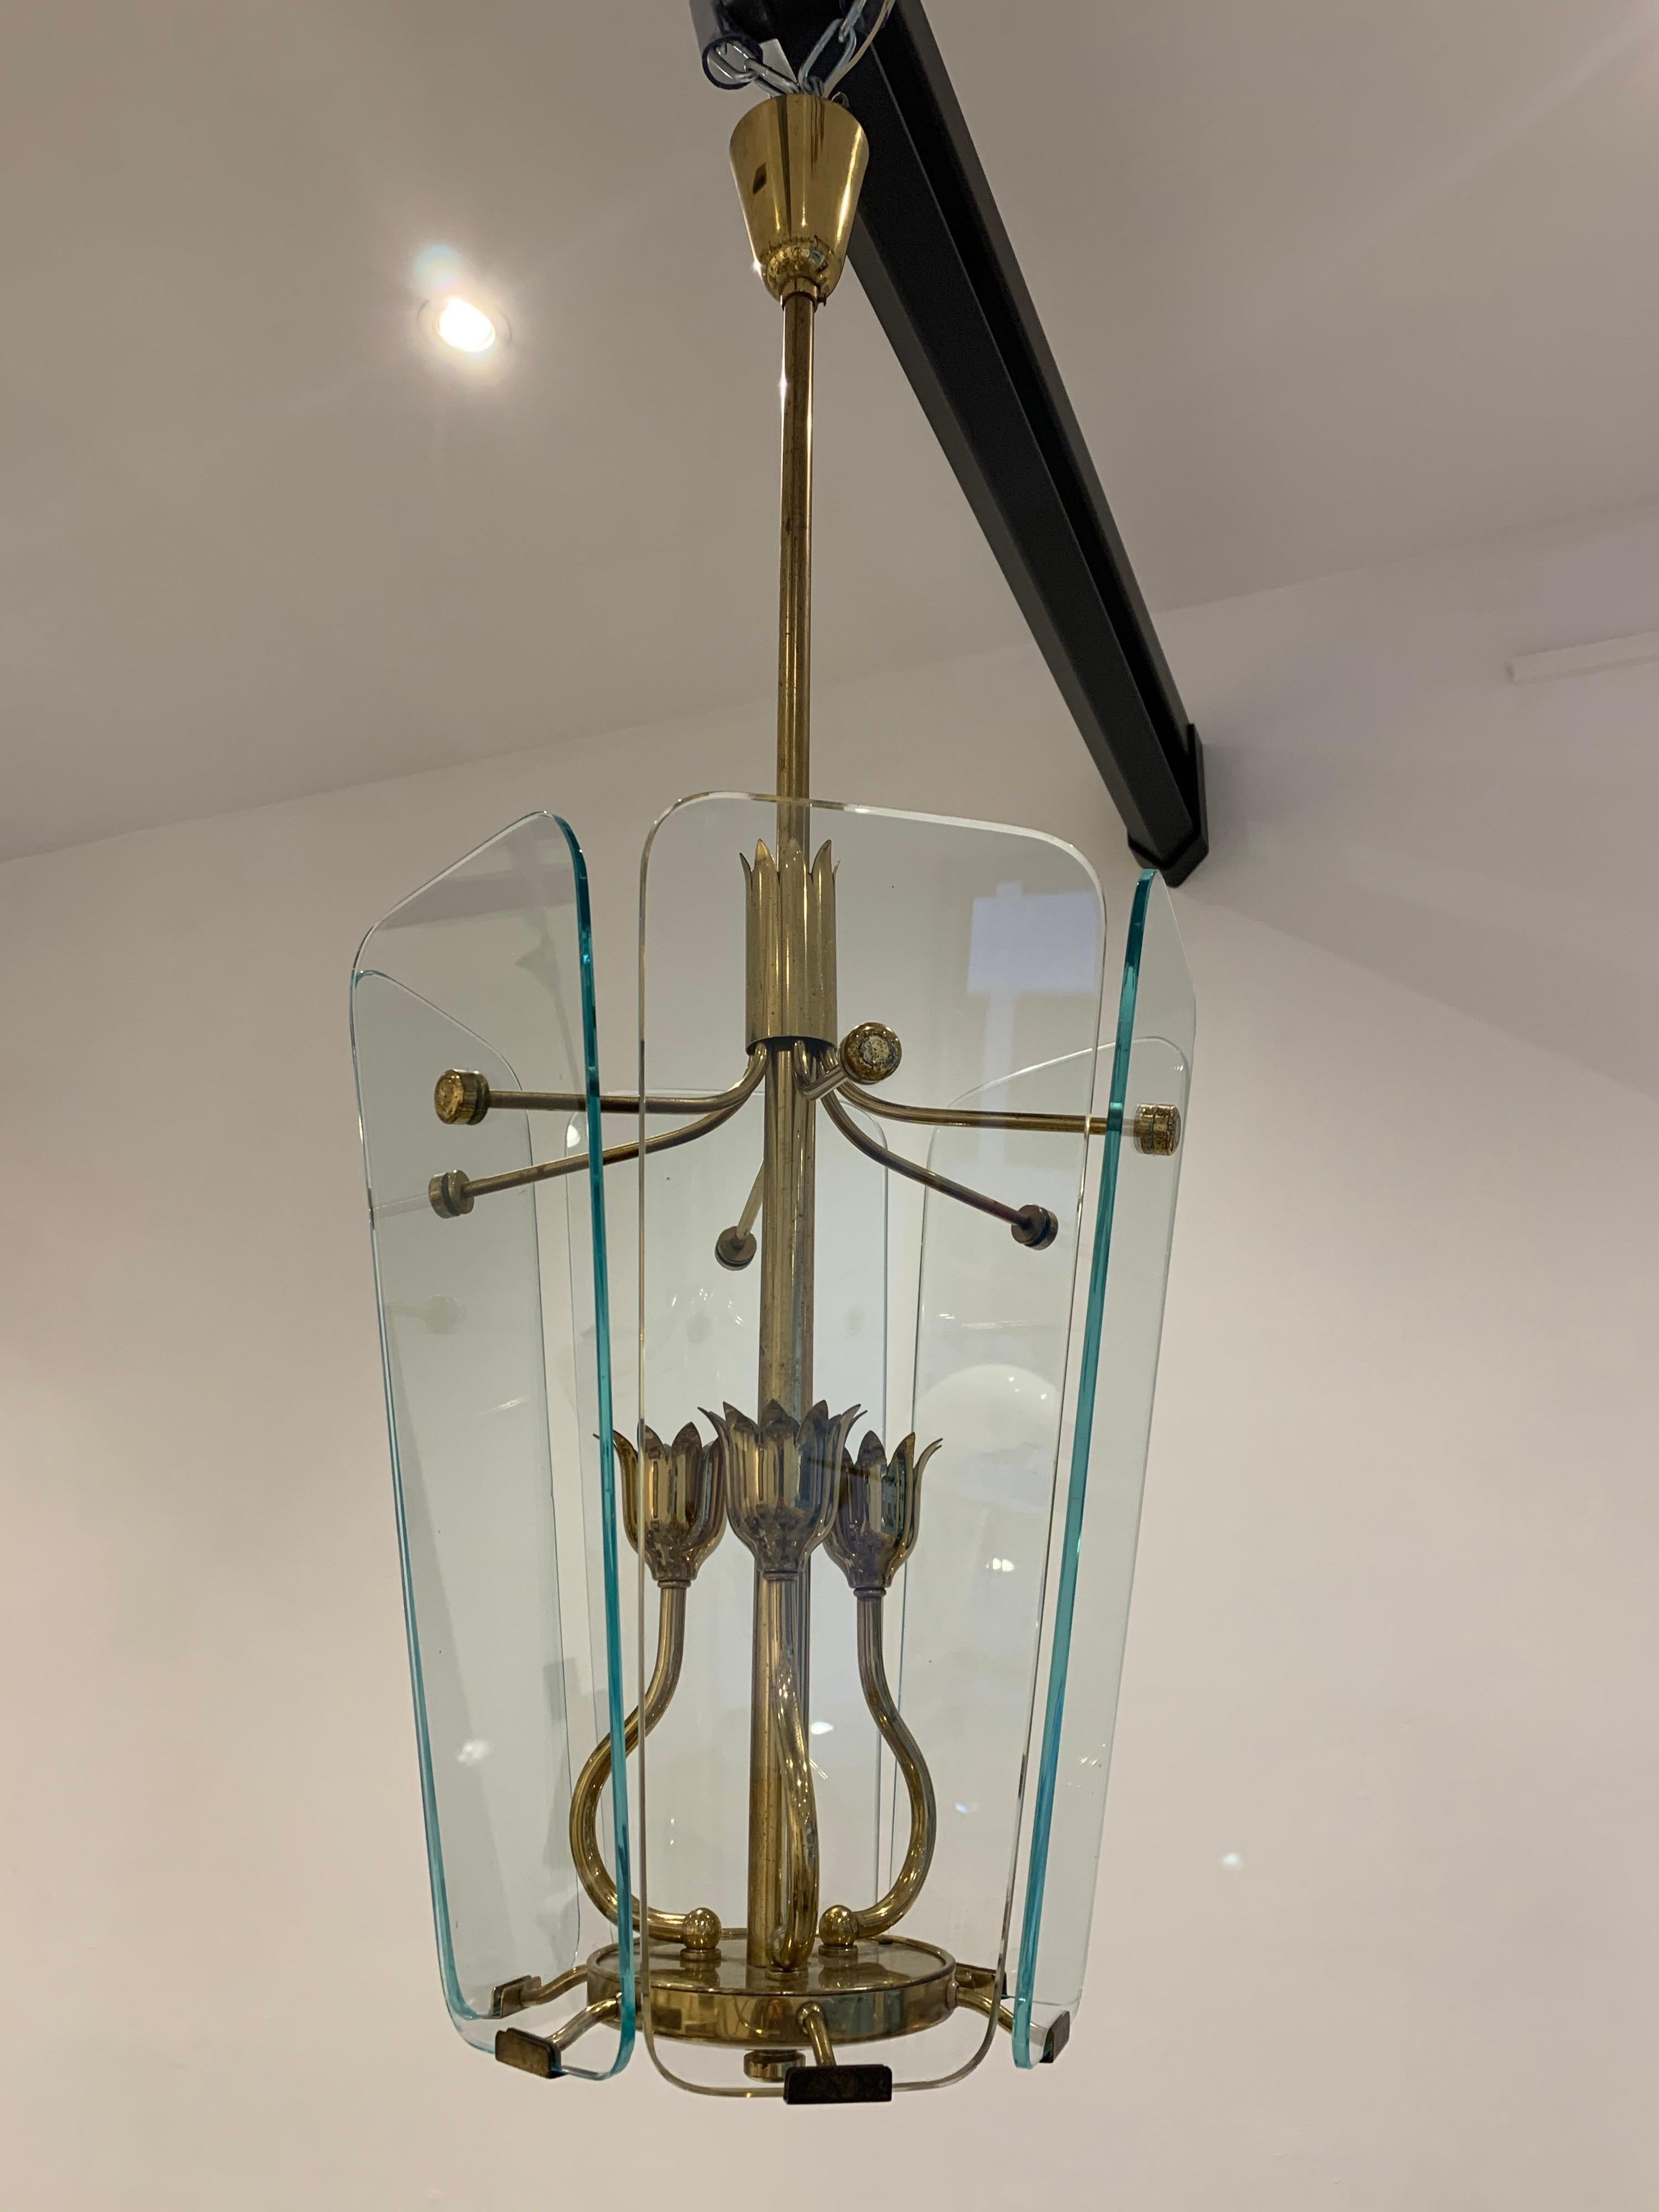 Pietro Chiesa was the artistic director of Fontana Arte in the 1930s. This work, whith brass flowers is typical of his style. He produced items using the same design. The lantern is of great quality.

 